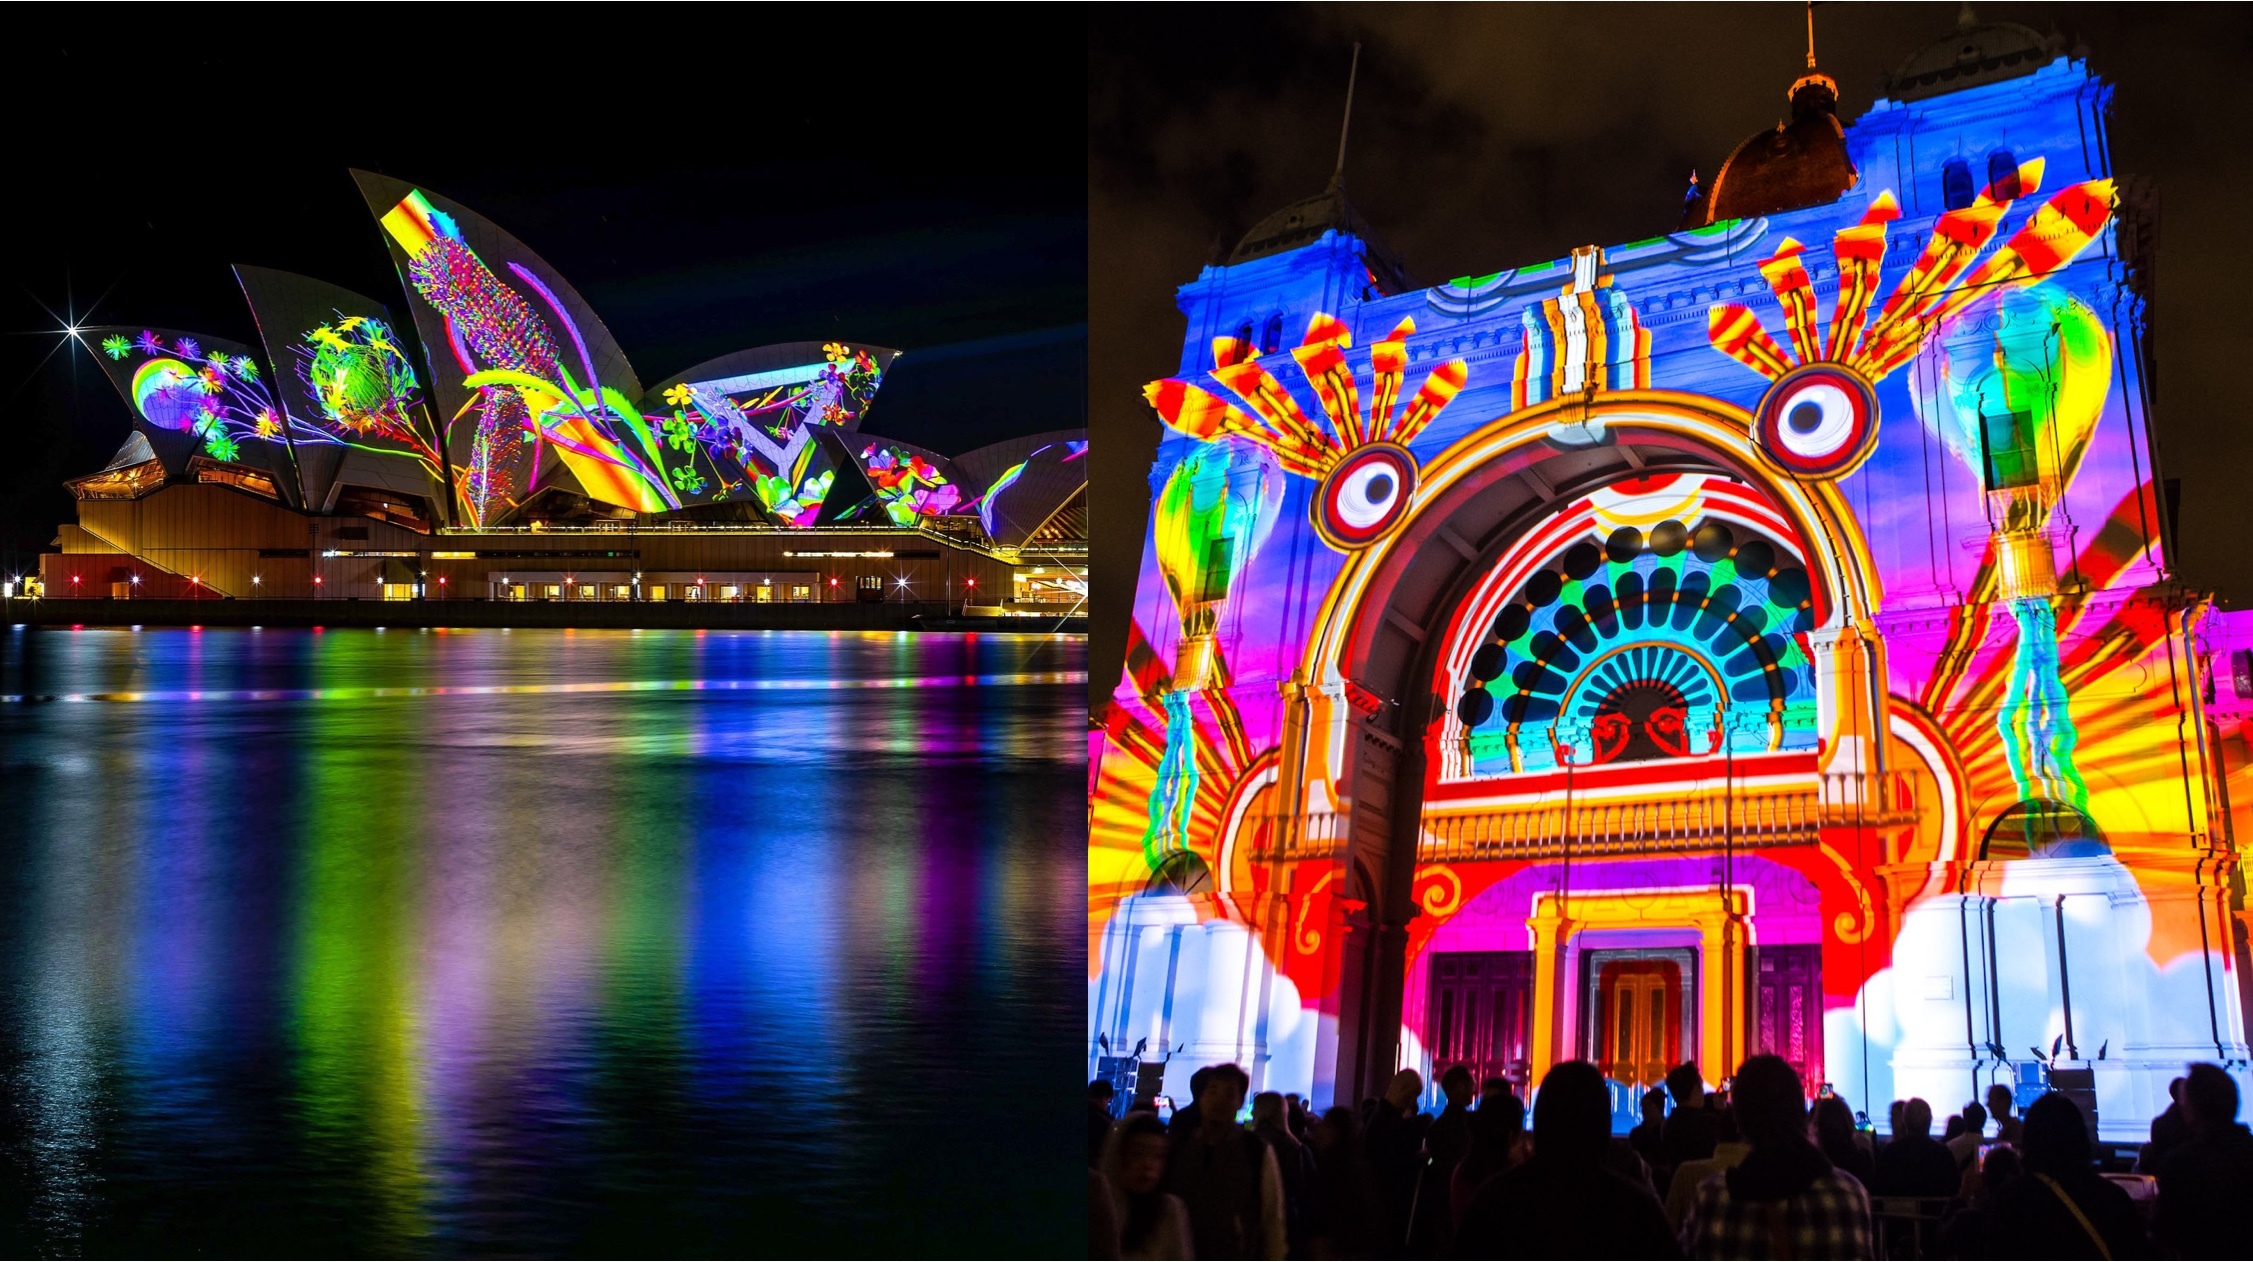 Vivid take Melbourne's White Night in the battle for show